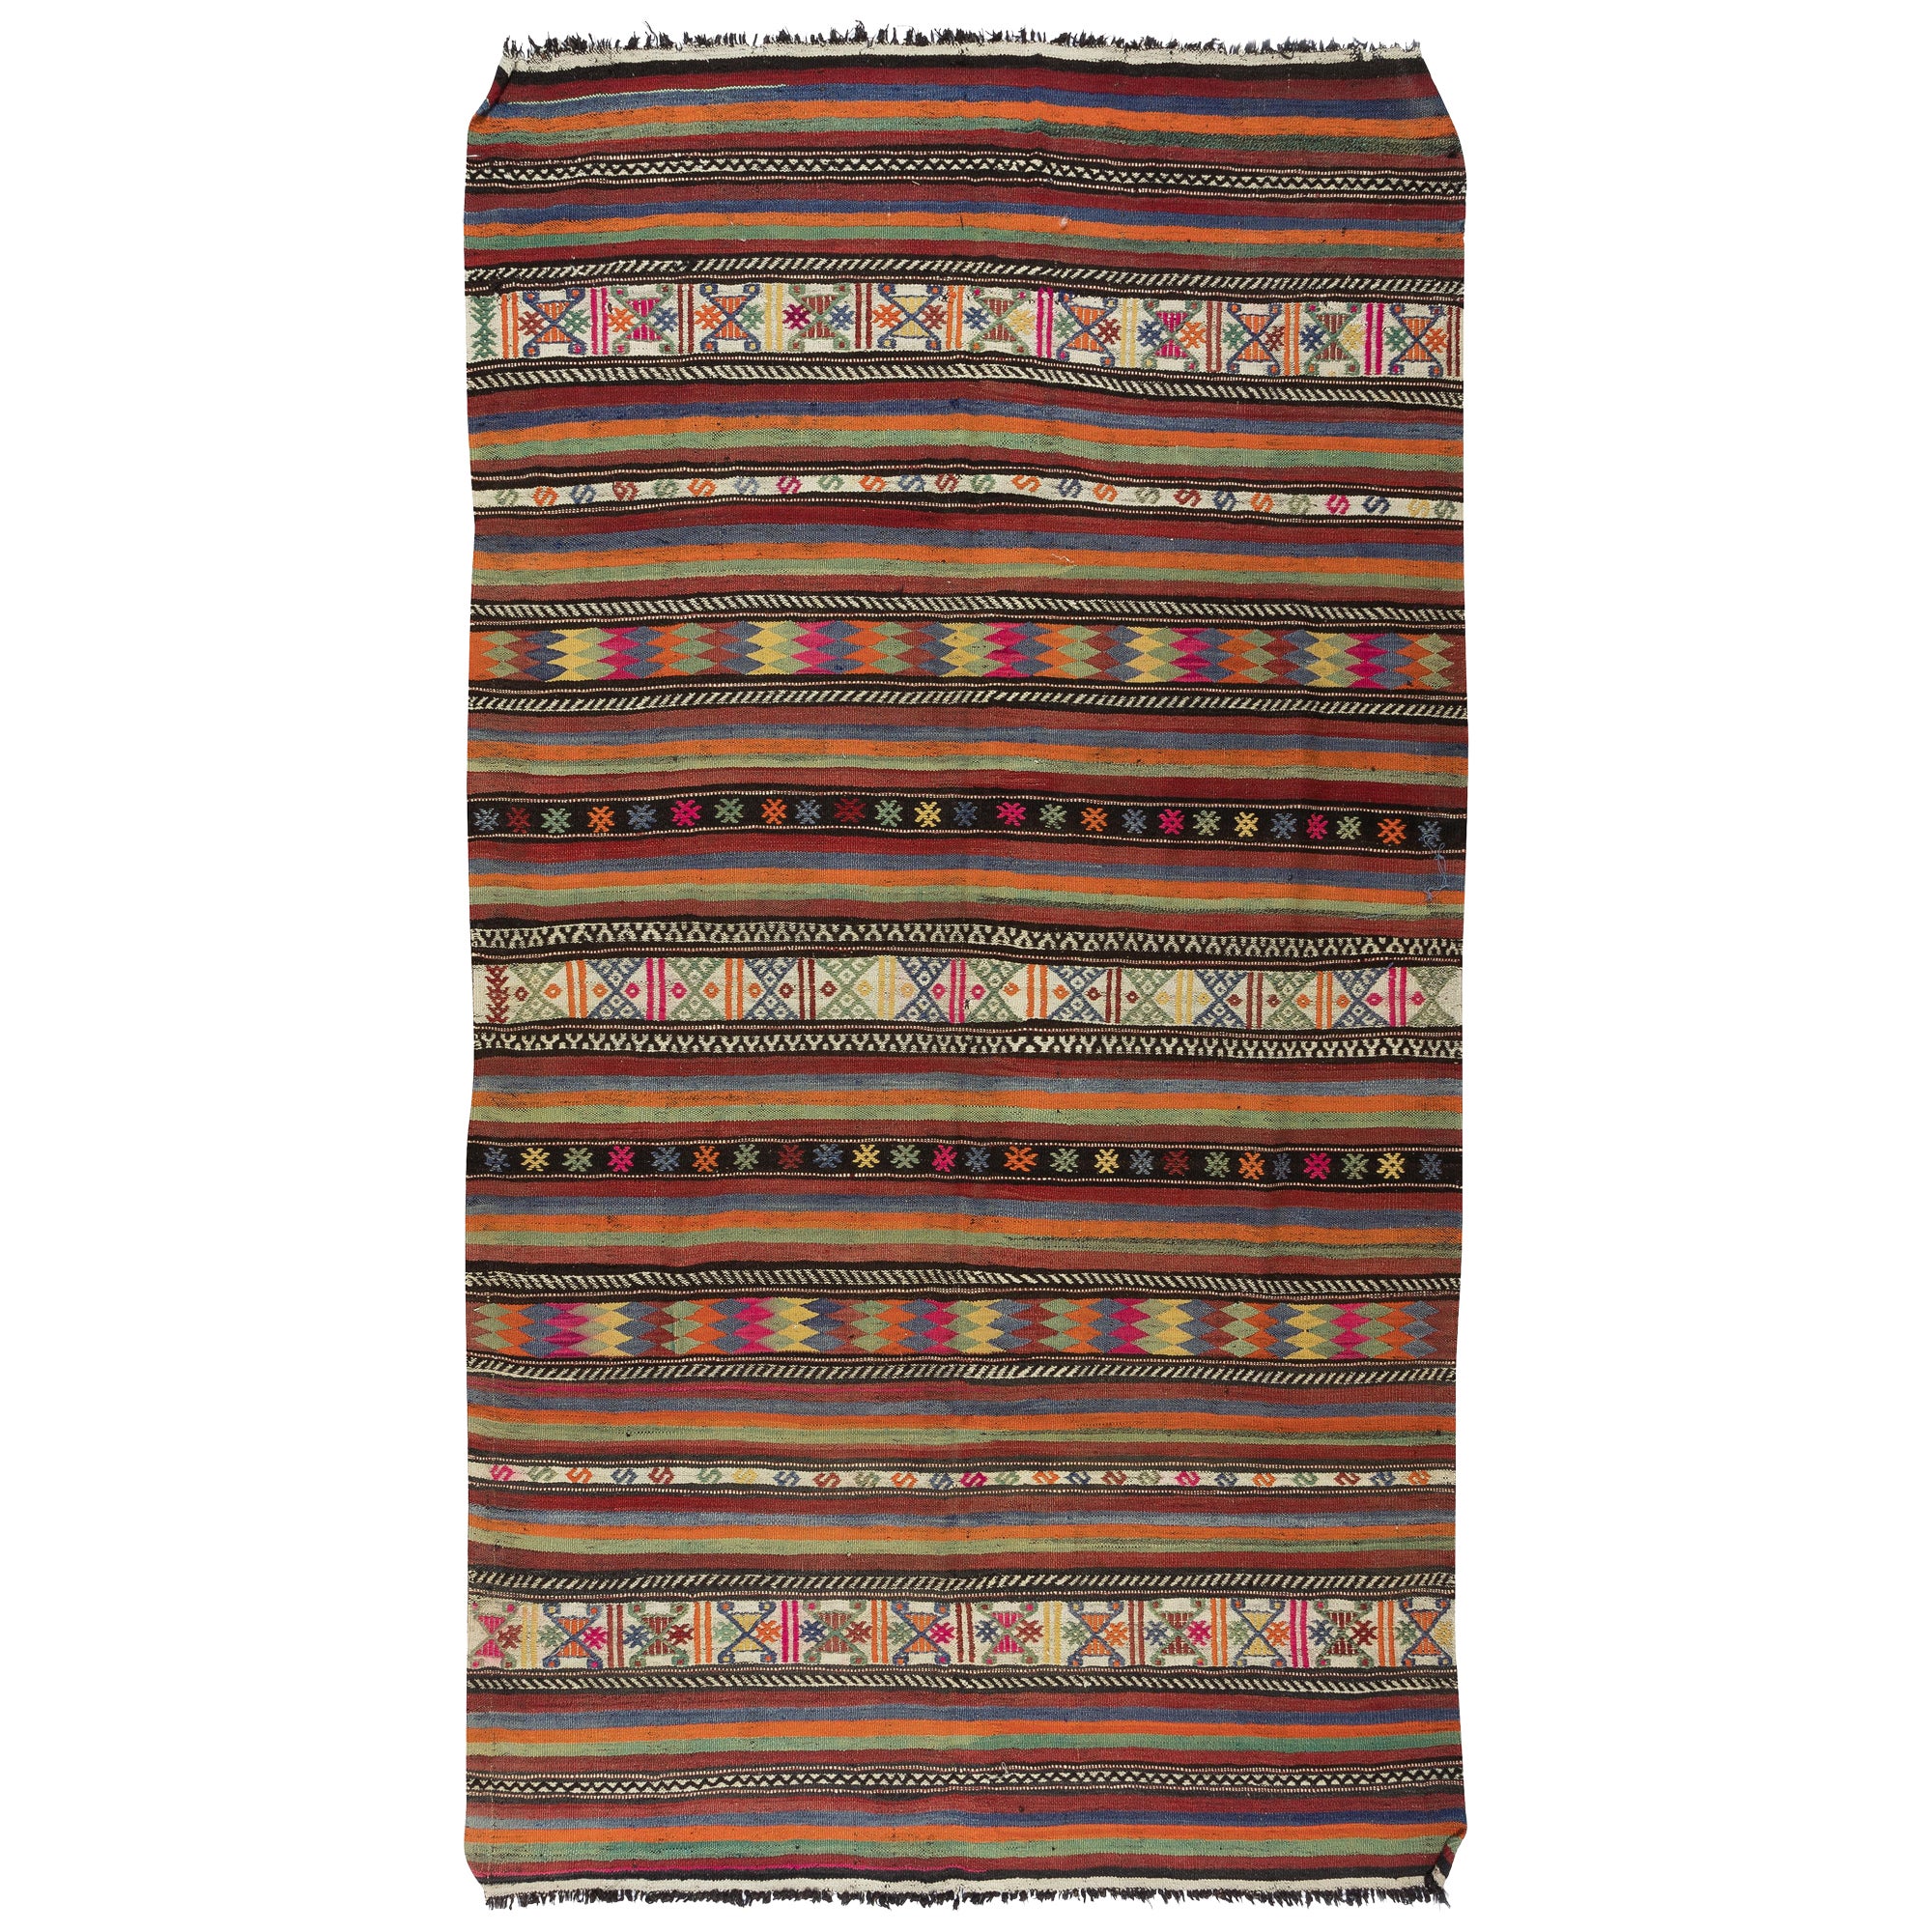 5.3x9.6 Ft Colorful Kilim Made of Hand-Spun Wool, Hand-Woven Turkish Striped Rug For Sale